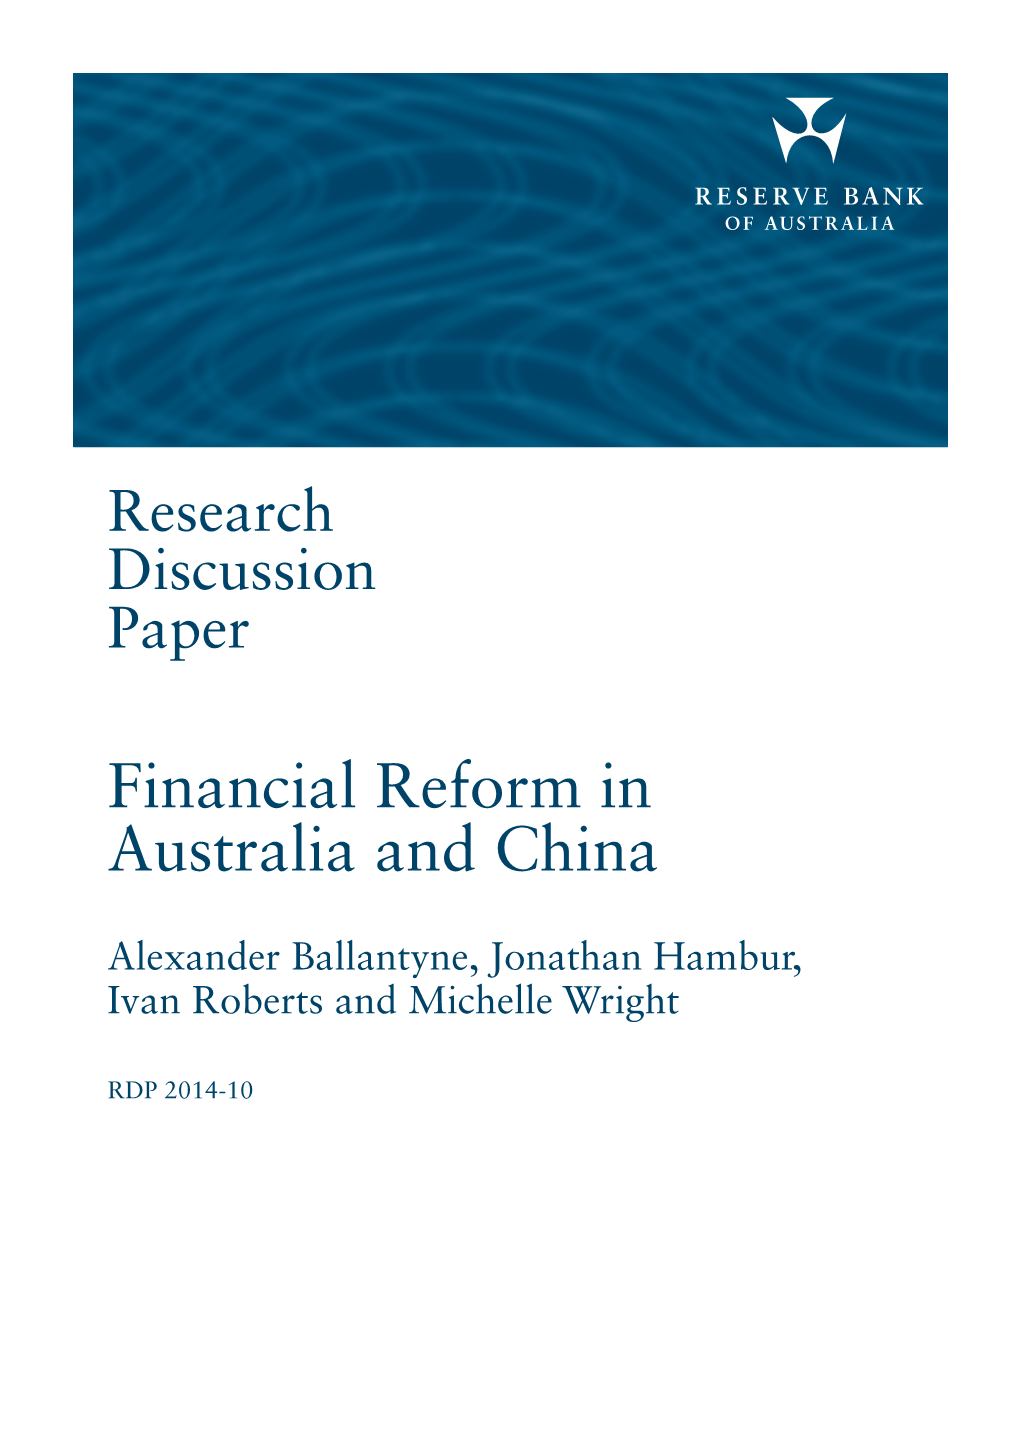 Financial Reform in Australia and China